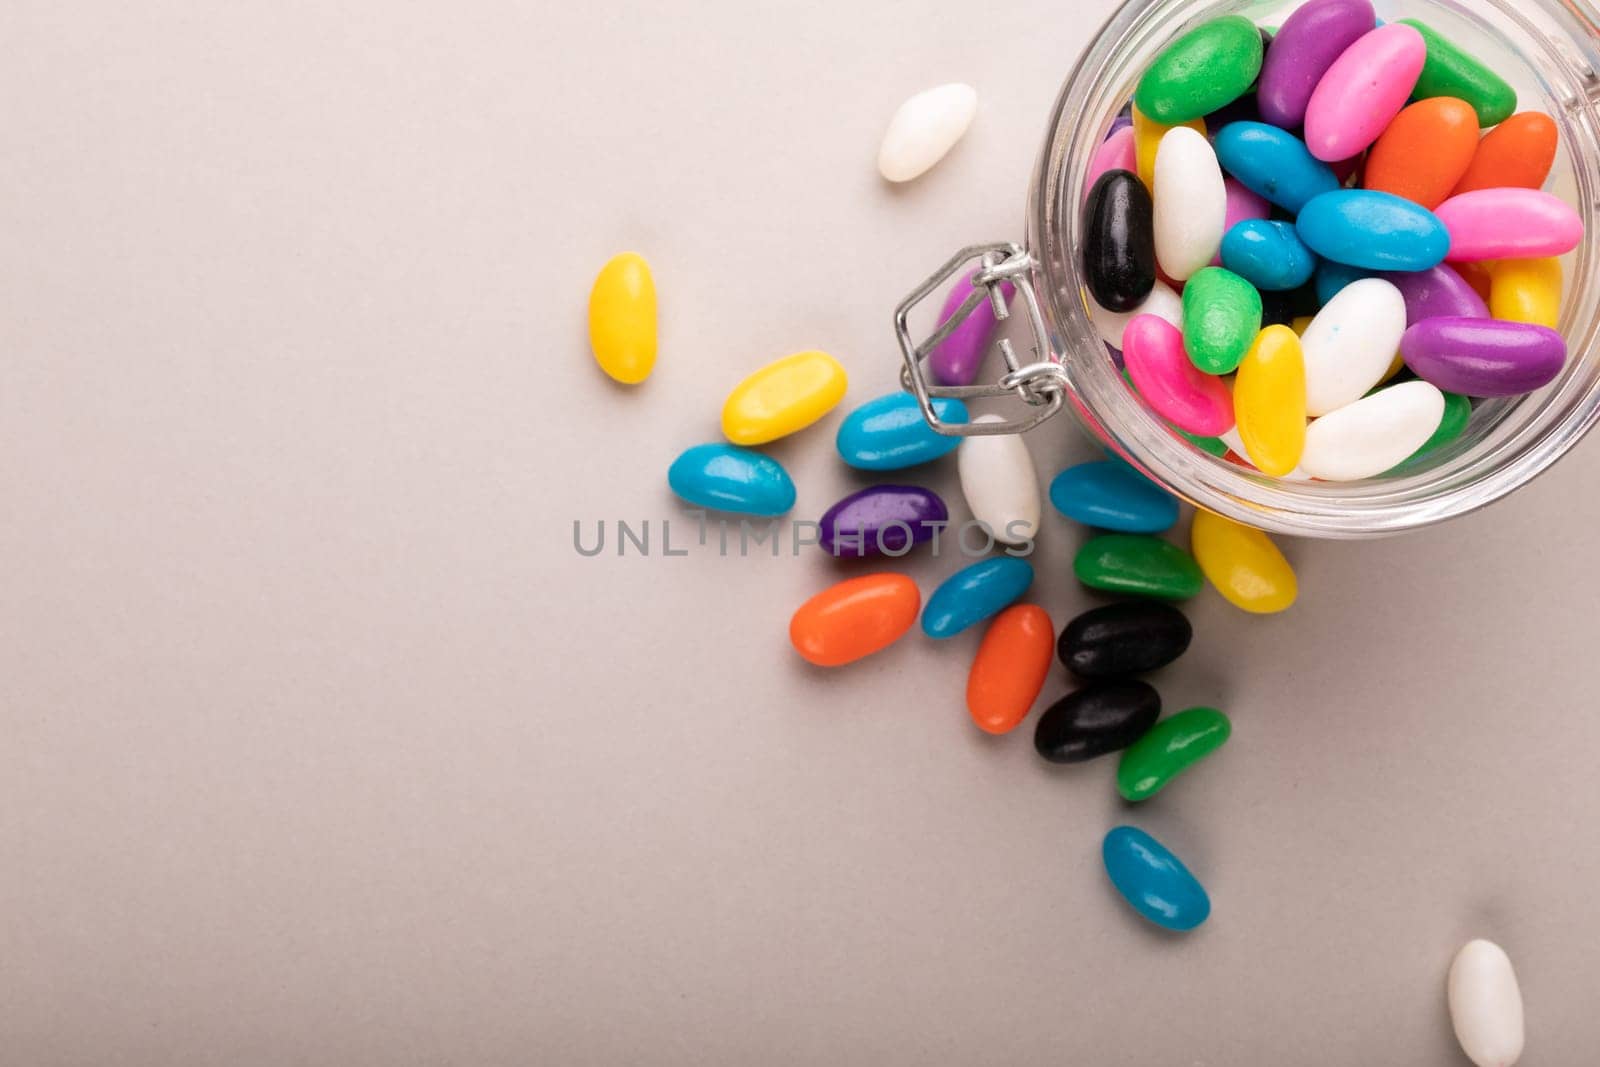 Overhead view of multi colored candies with open glass jar by copy space on white background. unaltered, sweet food and unhealthy eating concept.